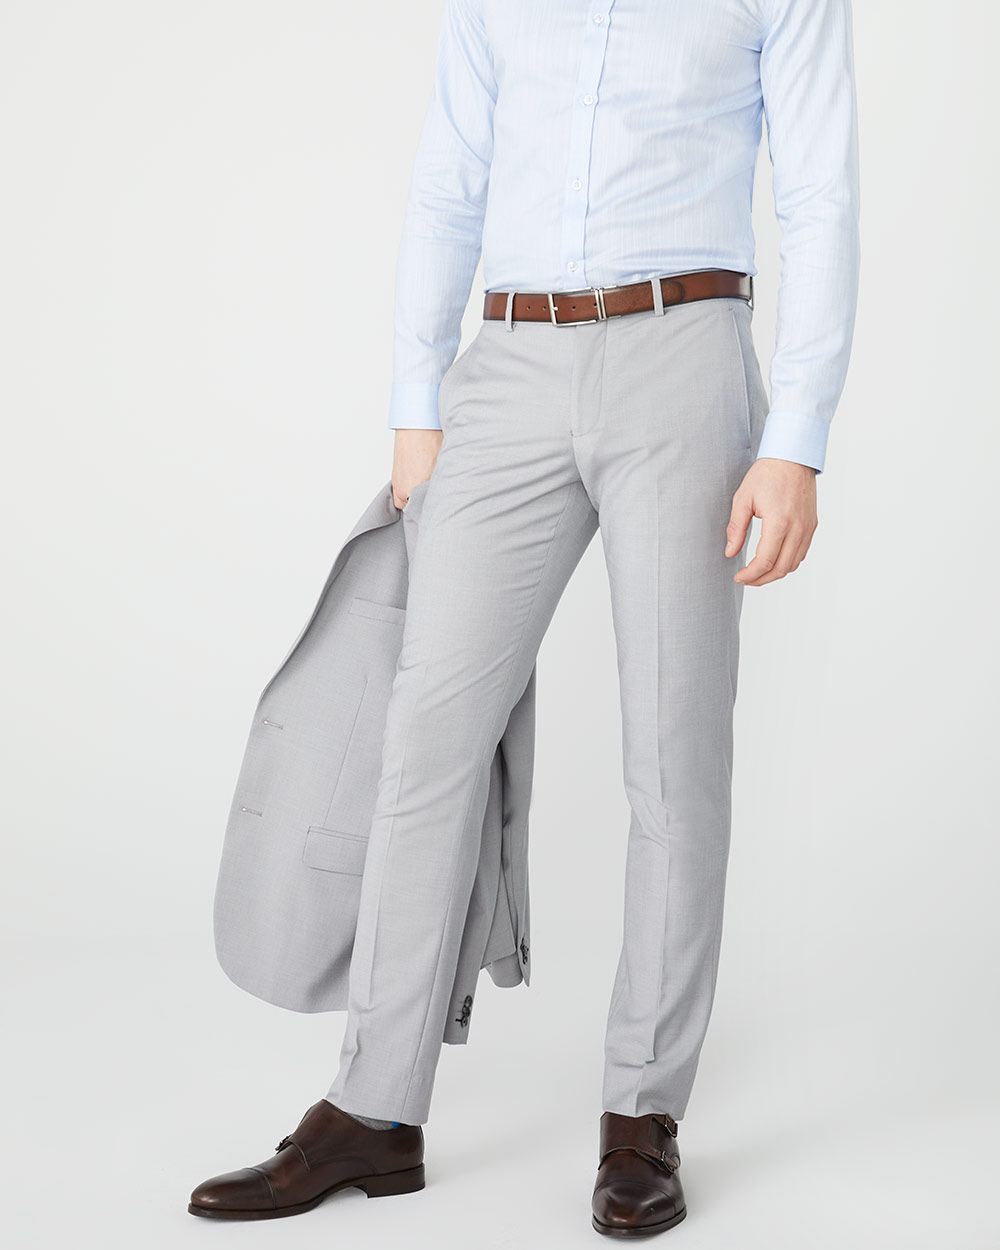 Essential Slim Fit light heather Grey suit pant - Tall | RW&CO.